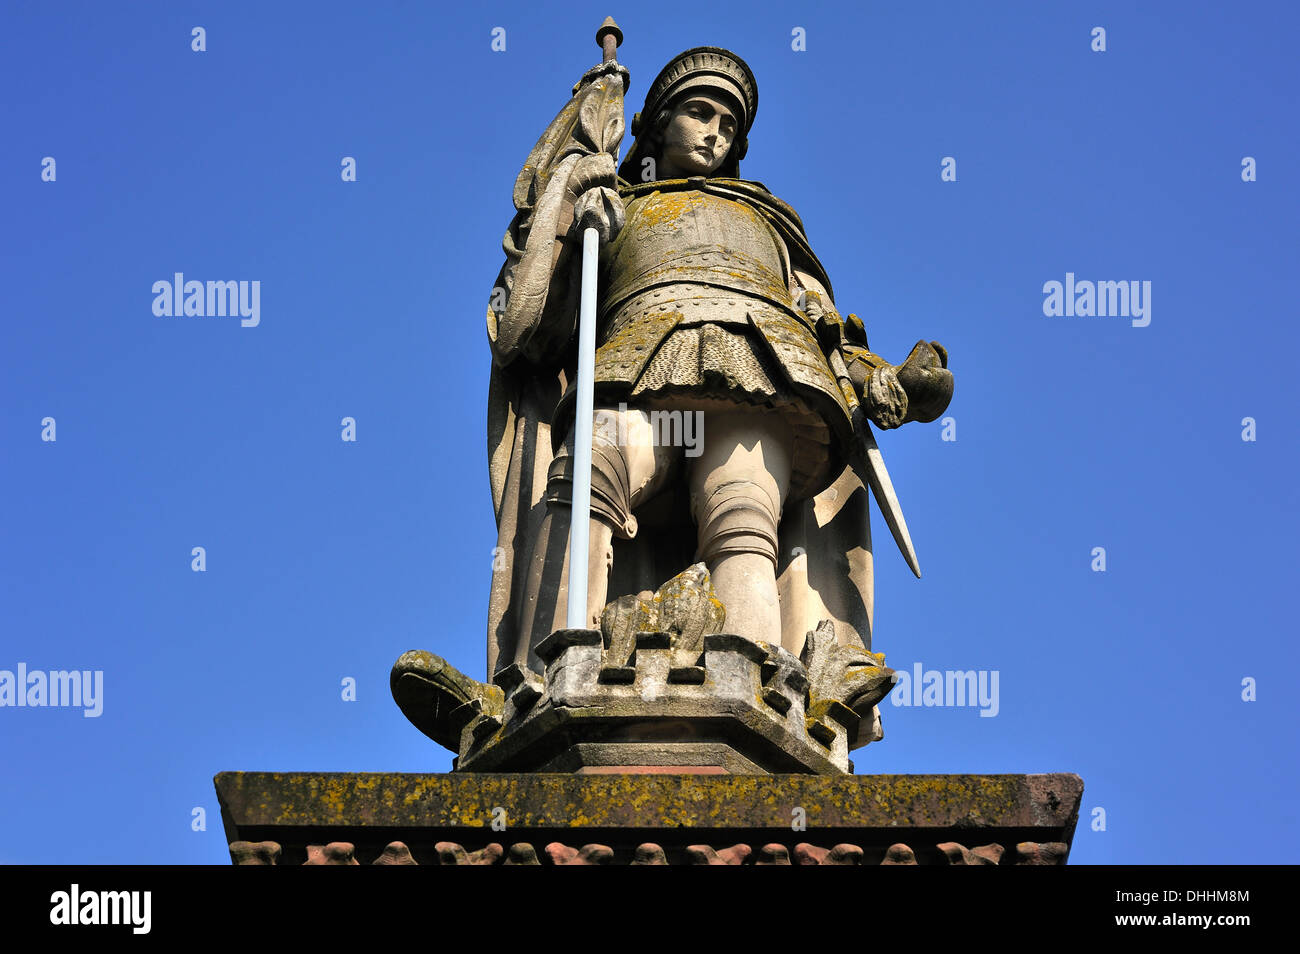 Sandstone statue of St. Florian against a blue sky, Hassfurt, Lower Franconia, Bavaria, Germany Stock Photo